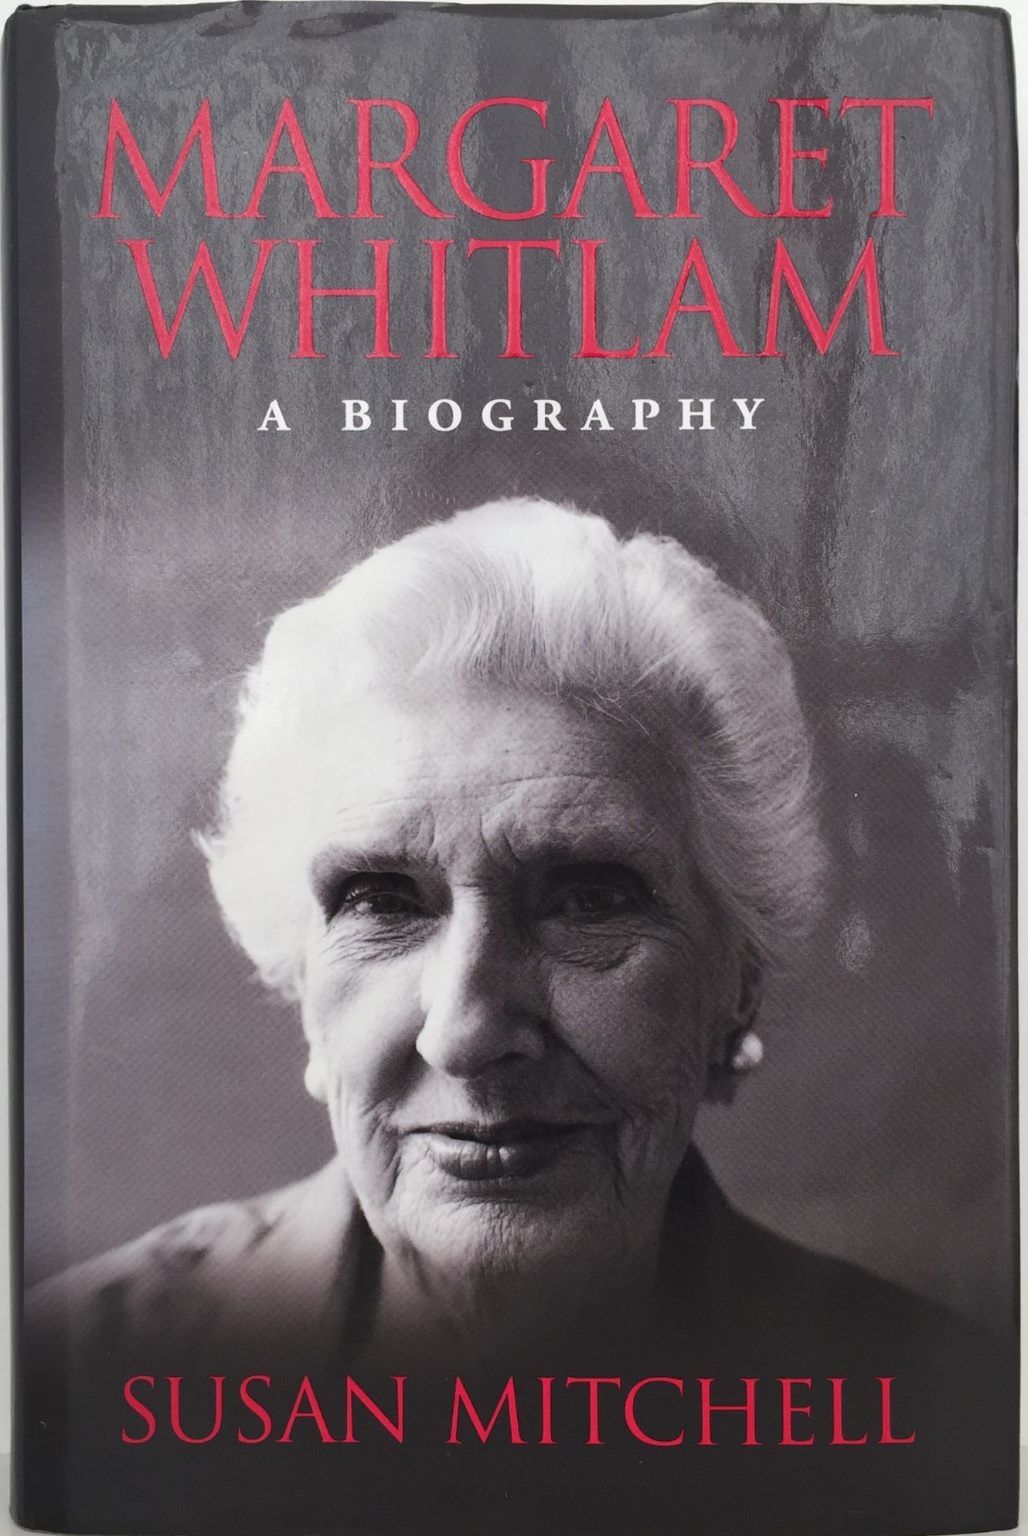 MARGARET WHITLAM: A Biography